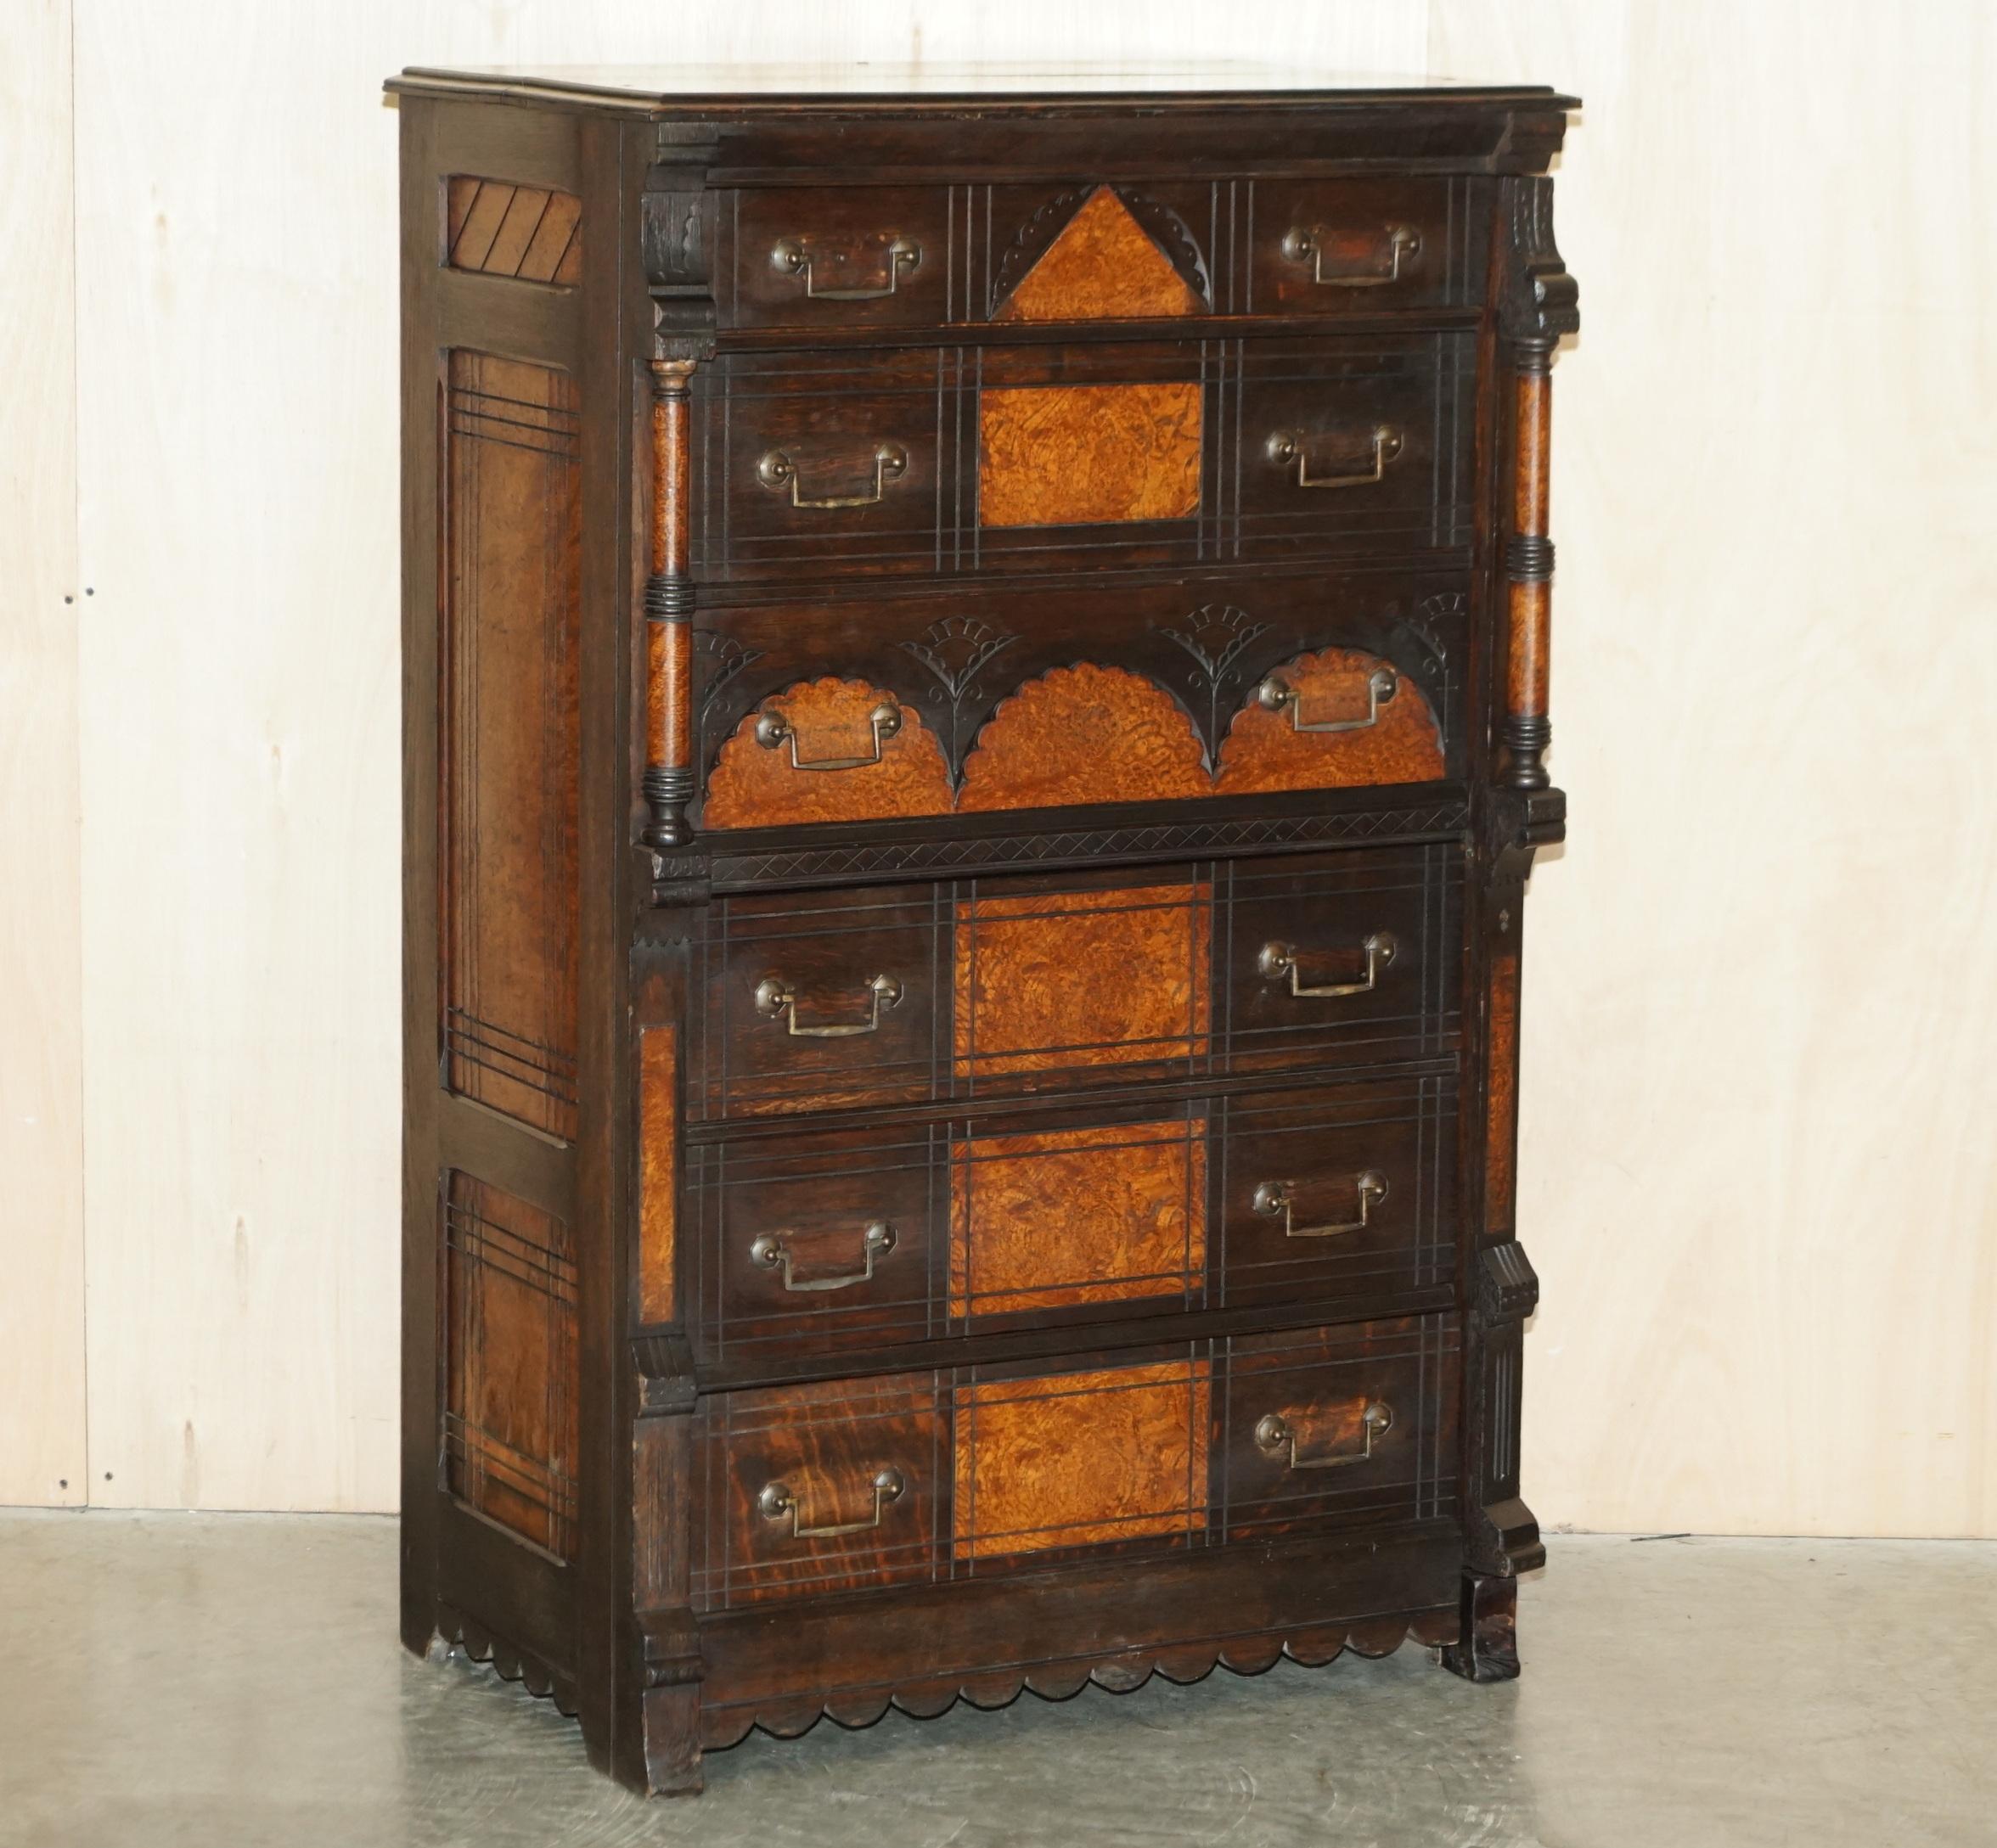 We are delighted to offer for sale this important, one of a kind, R Crosby & Son, Victorian Aesthetic Movement, Burr Elm and Oak Wellington Chest of Drawers housing 160 Sulphur casts of Royal and Historical Seals

What a find! This piece has so